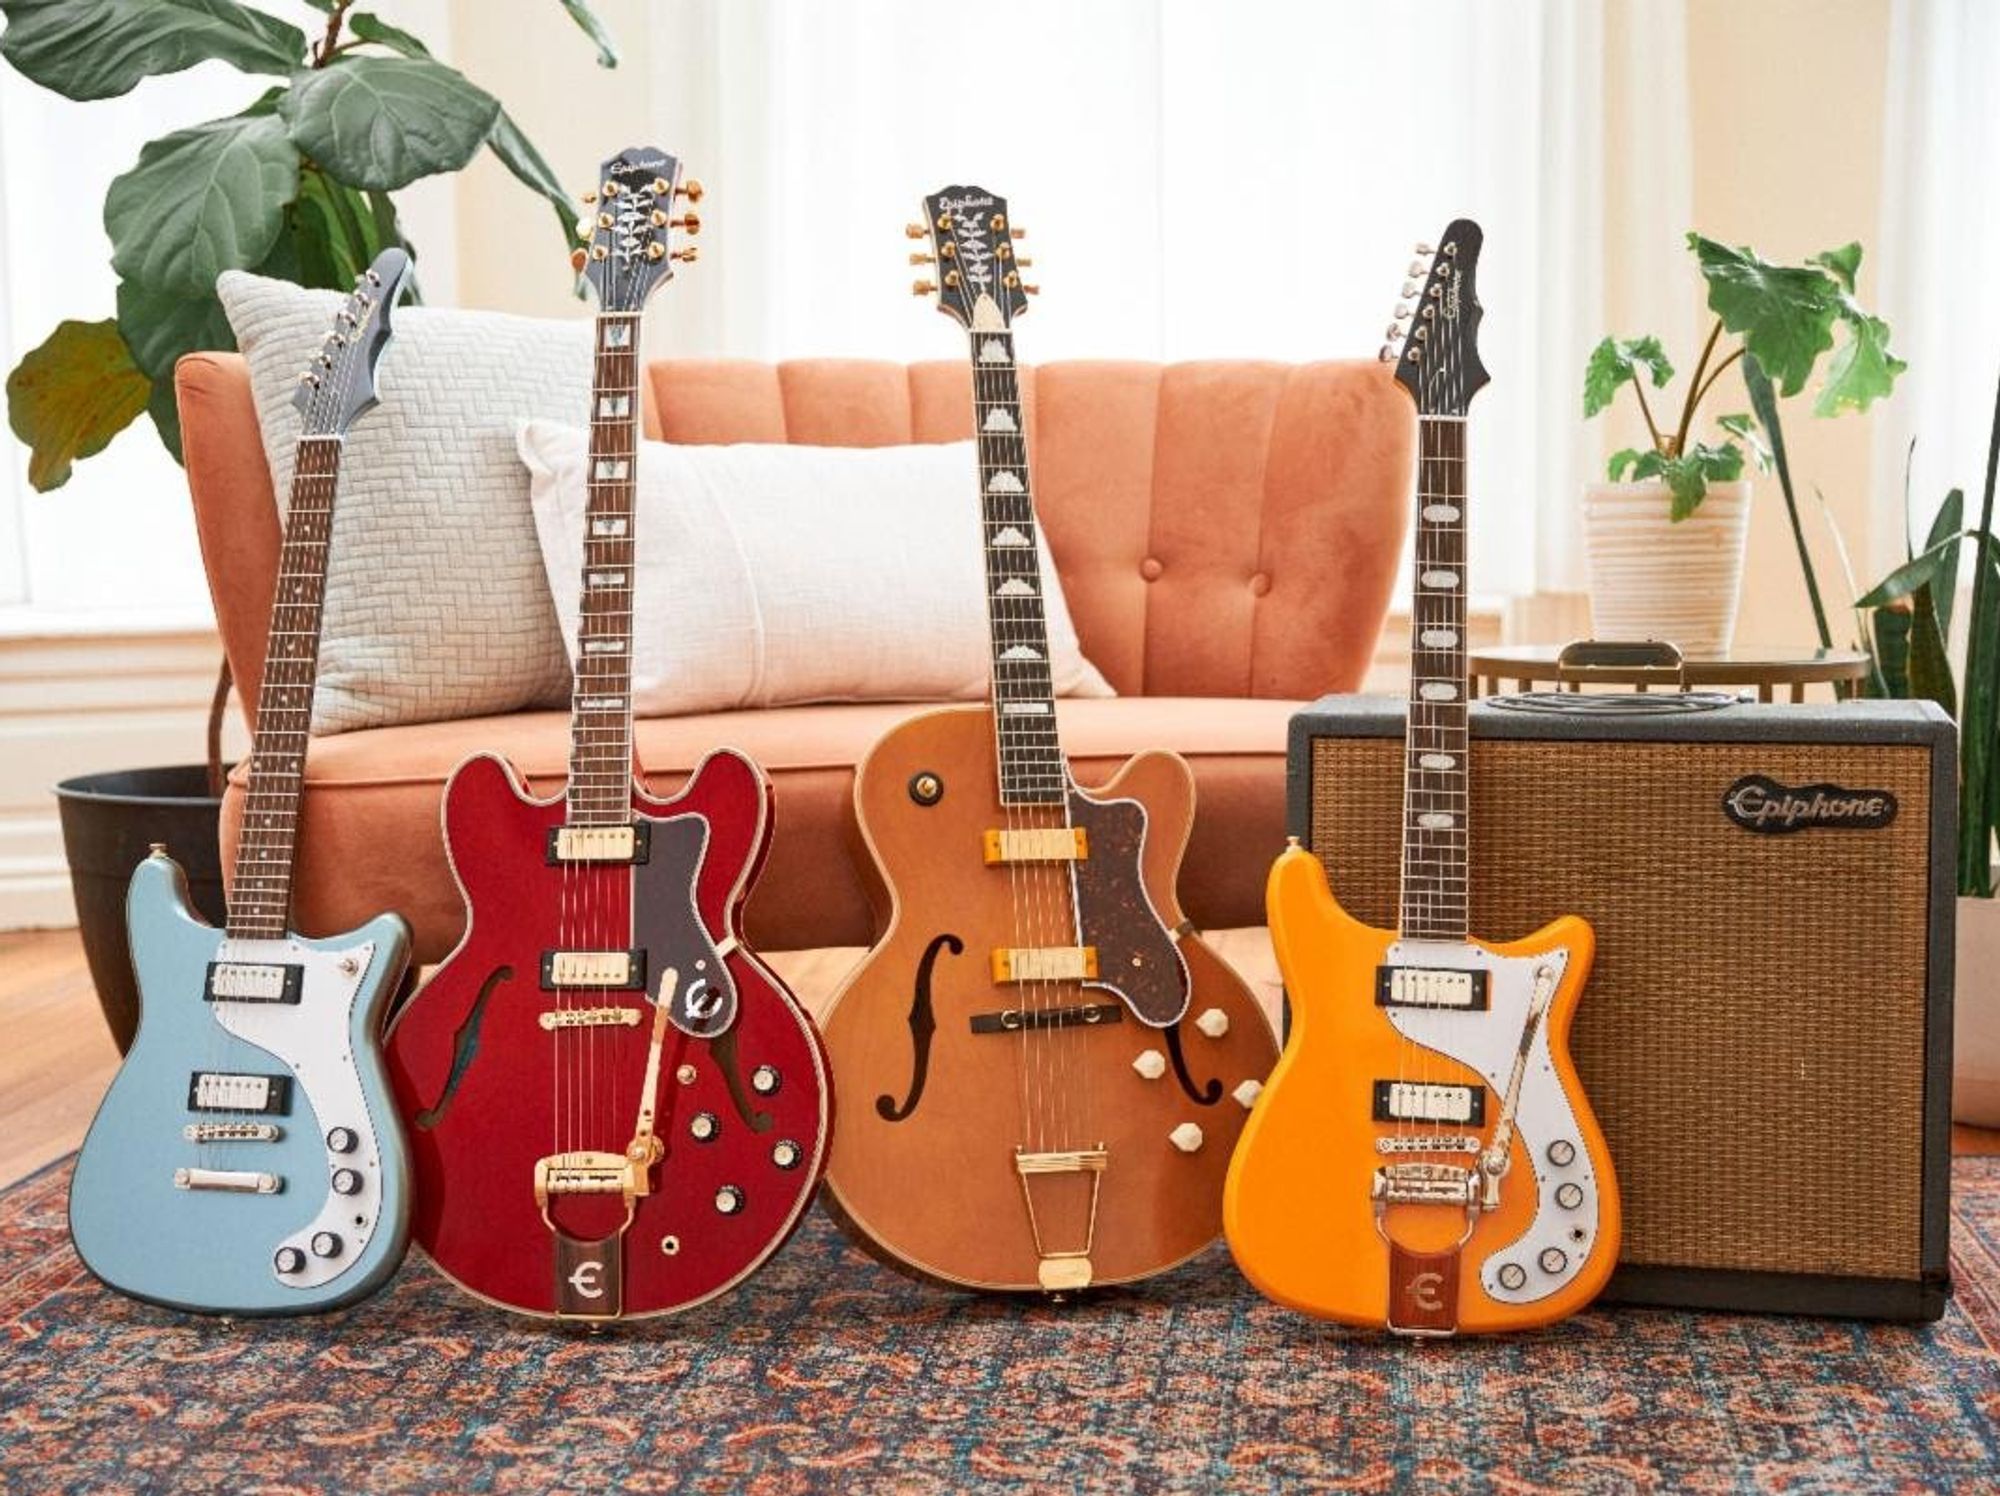 Epiphone Announces New Models in Celebration of 150th Anniversary